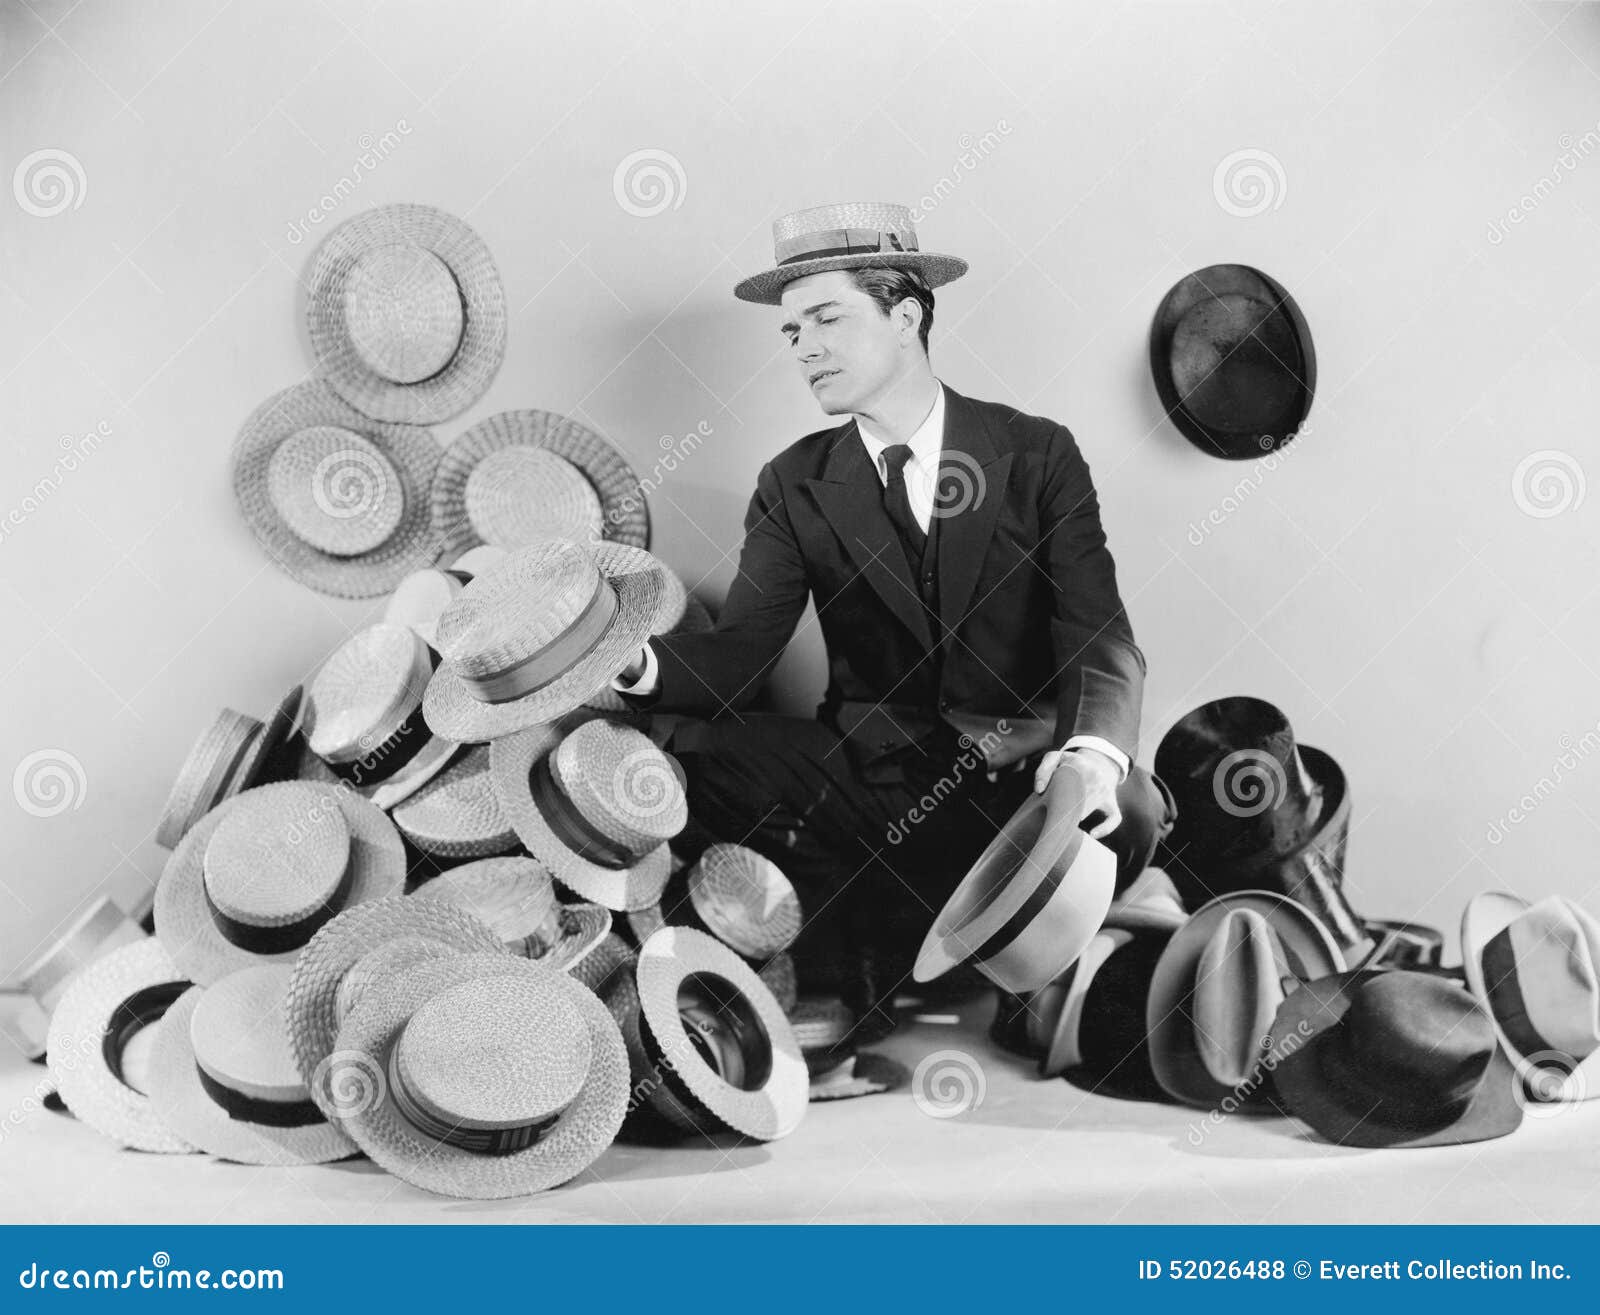 man sitting on the floor surrounded by hats